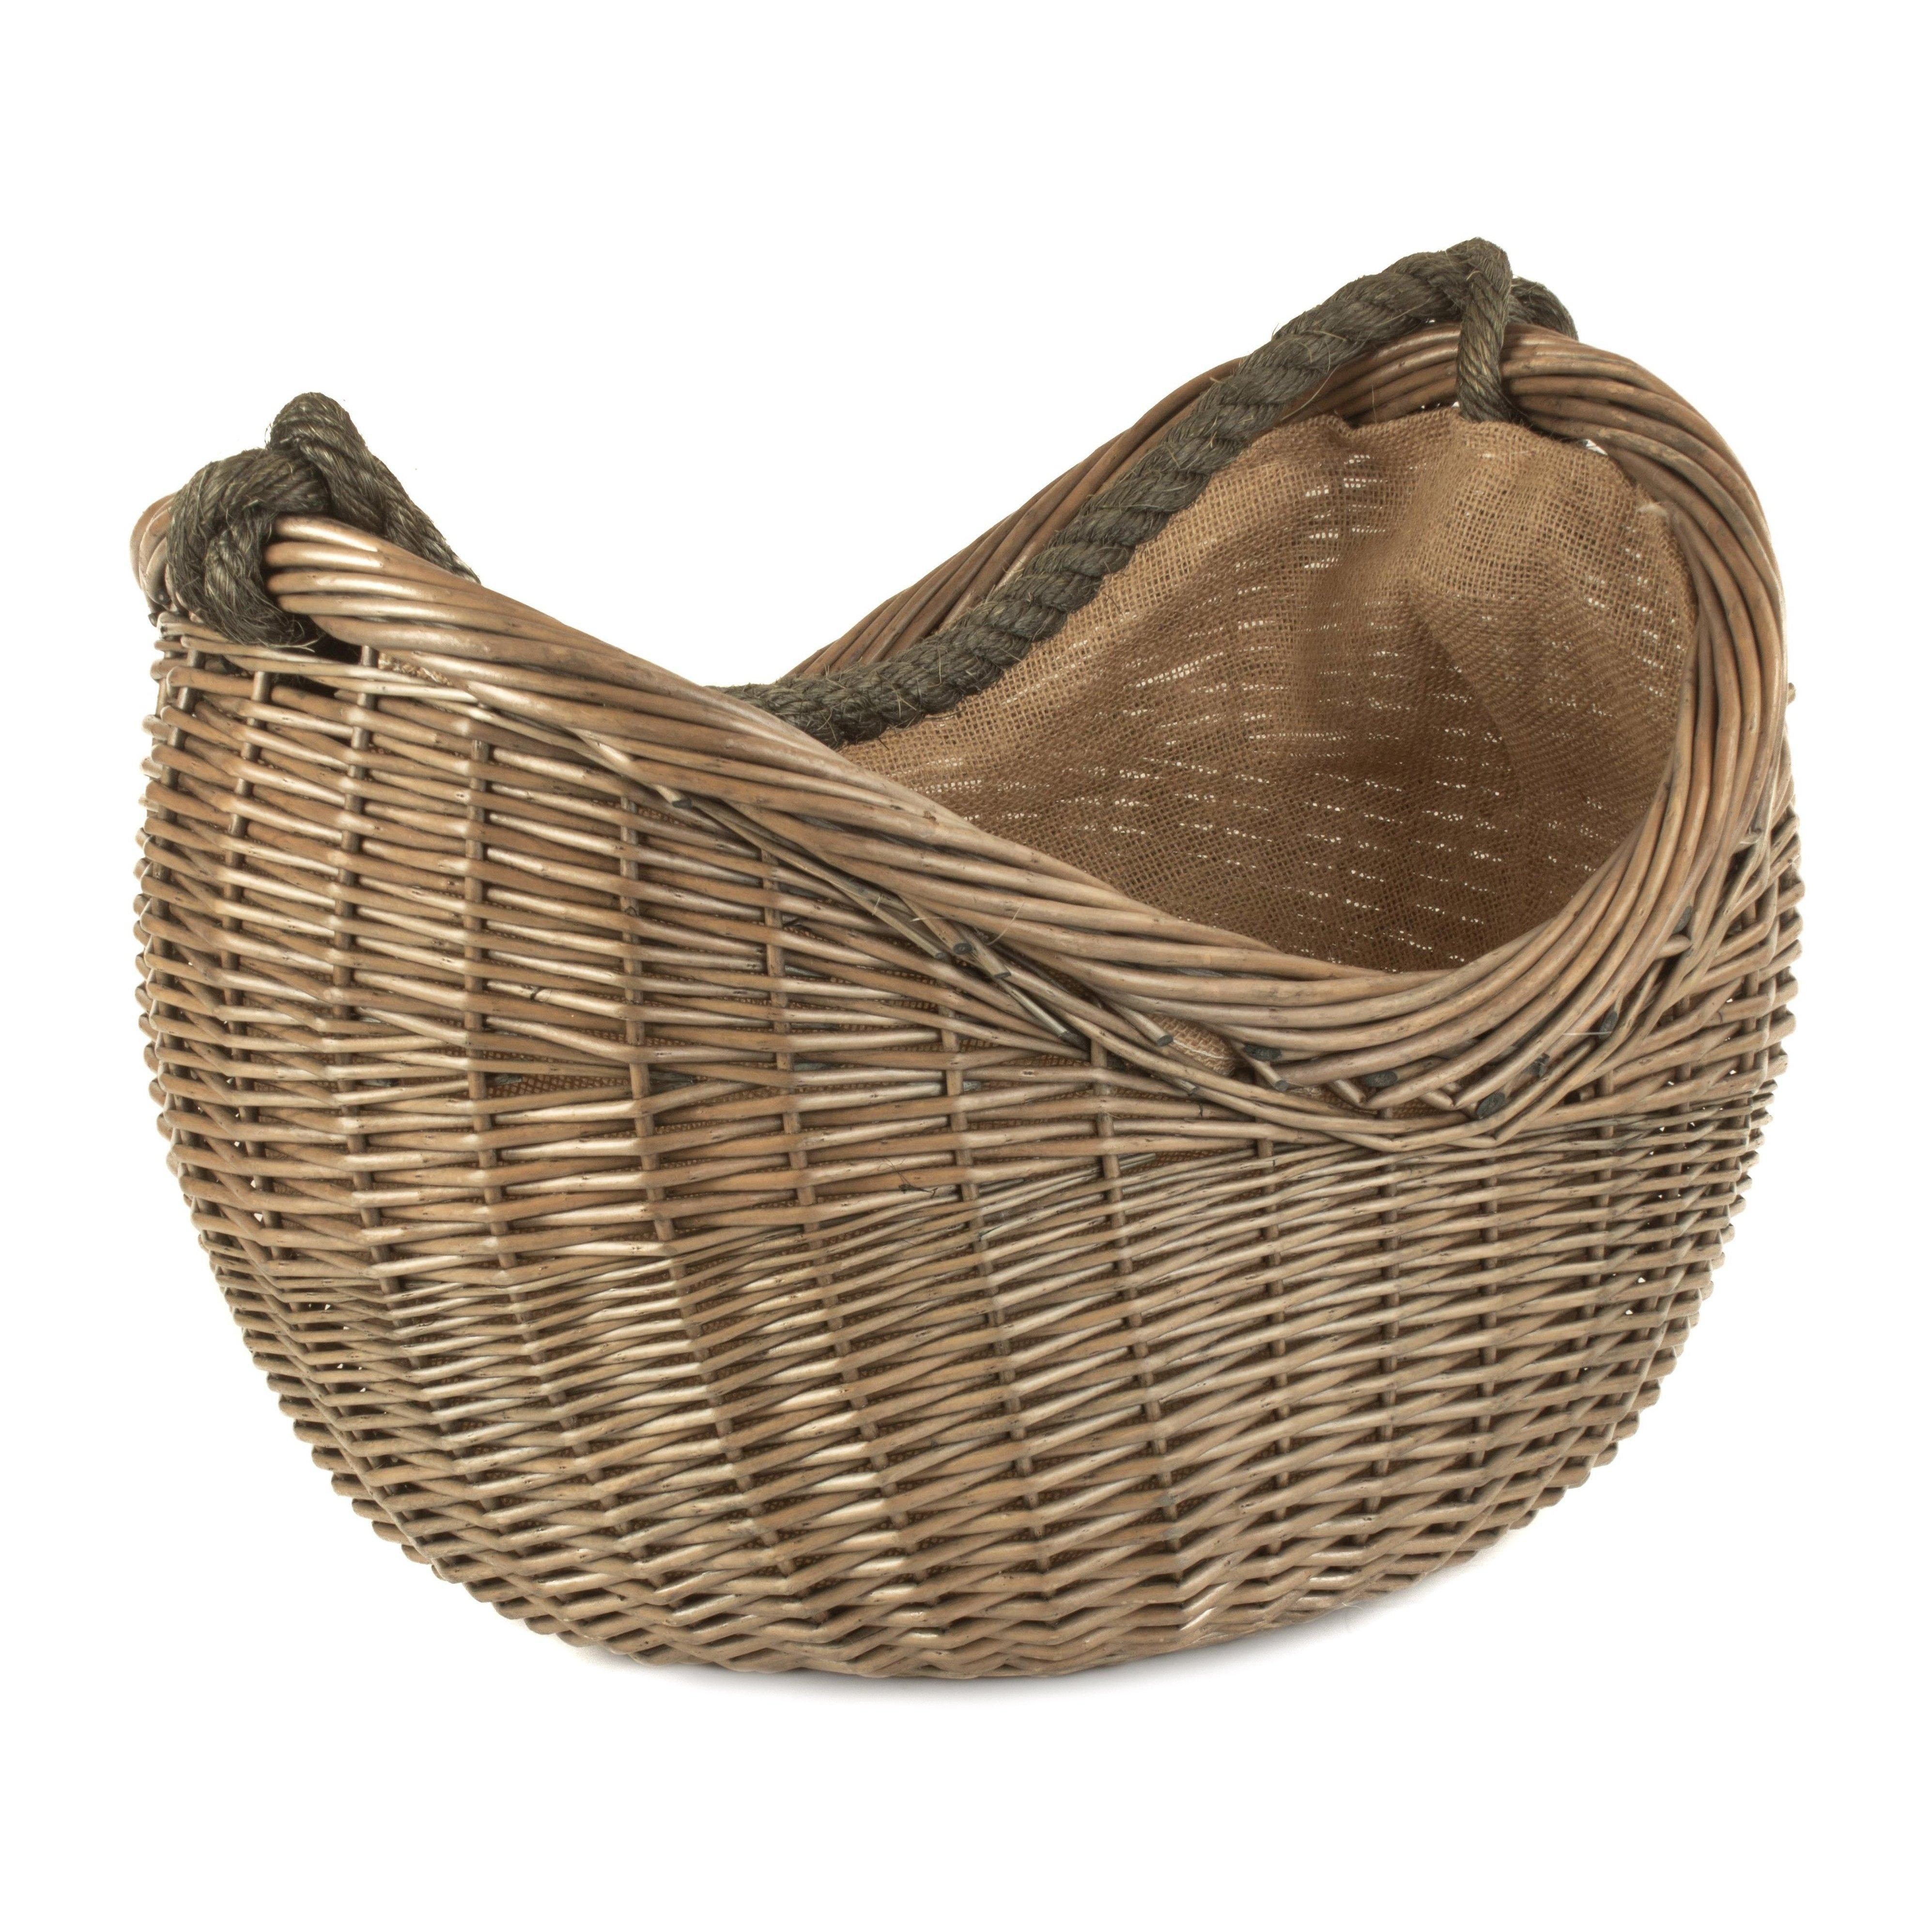 Wicker Antique Wash Rope Handled Carrying Basket - image 1